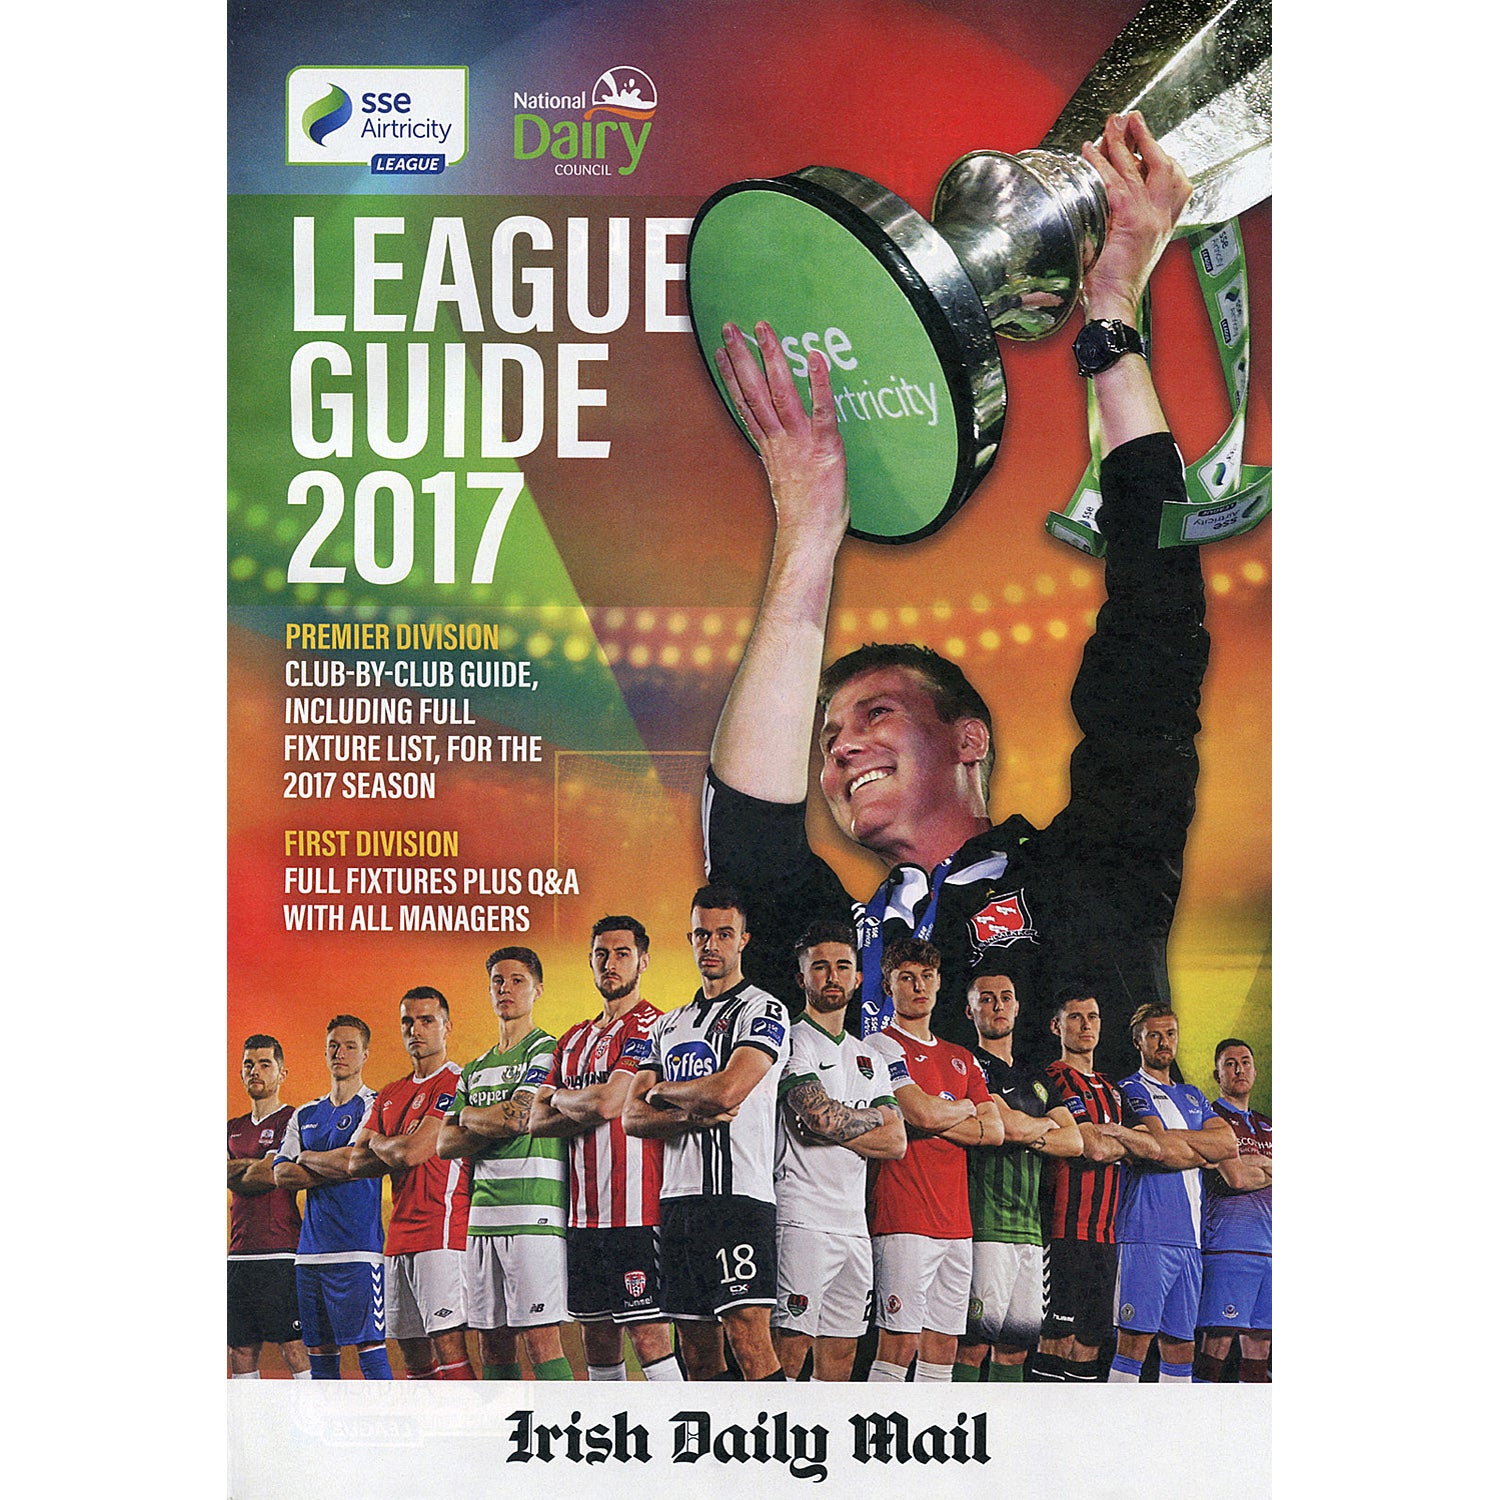 SSE Airtricity League Guide 2017 (Ireland Season Preview)